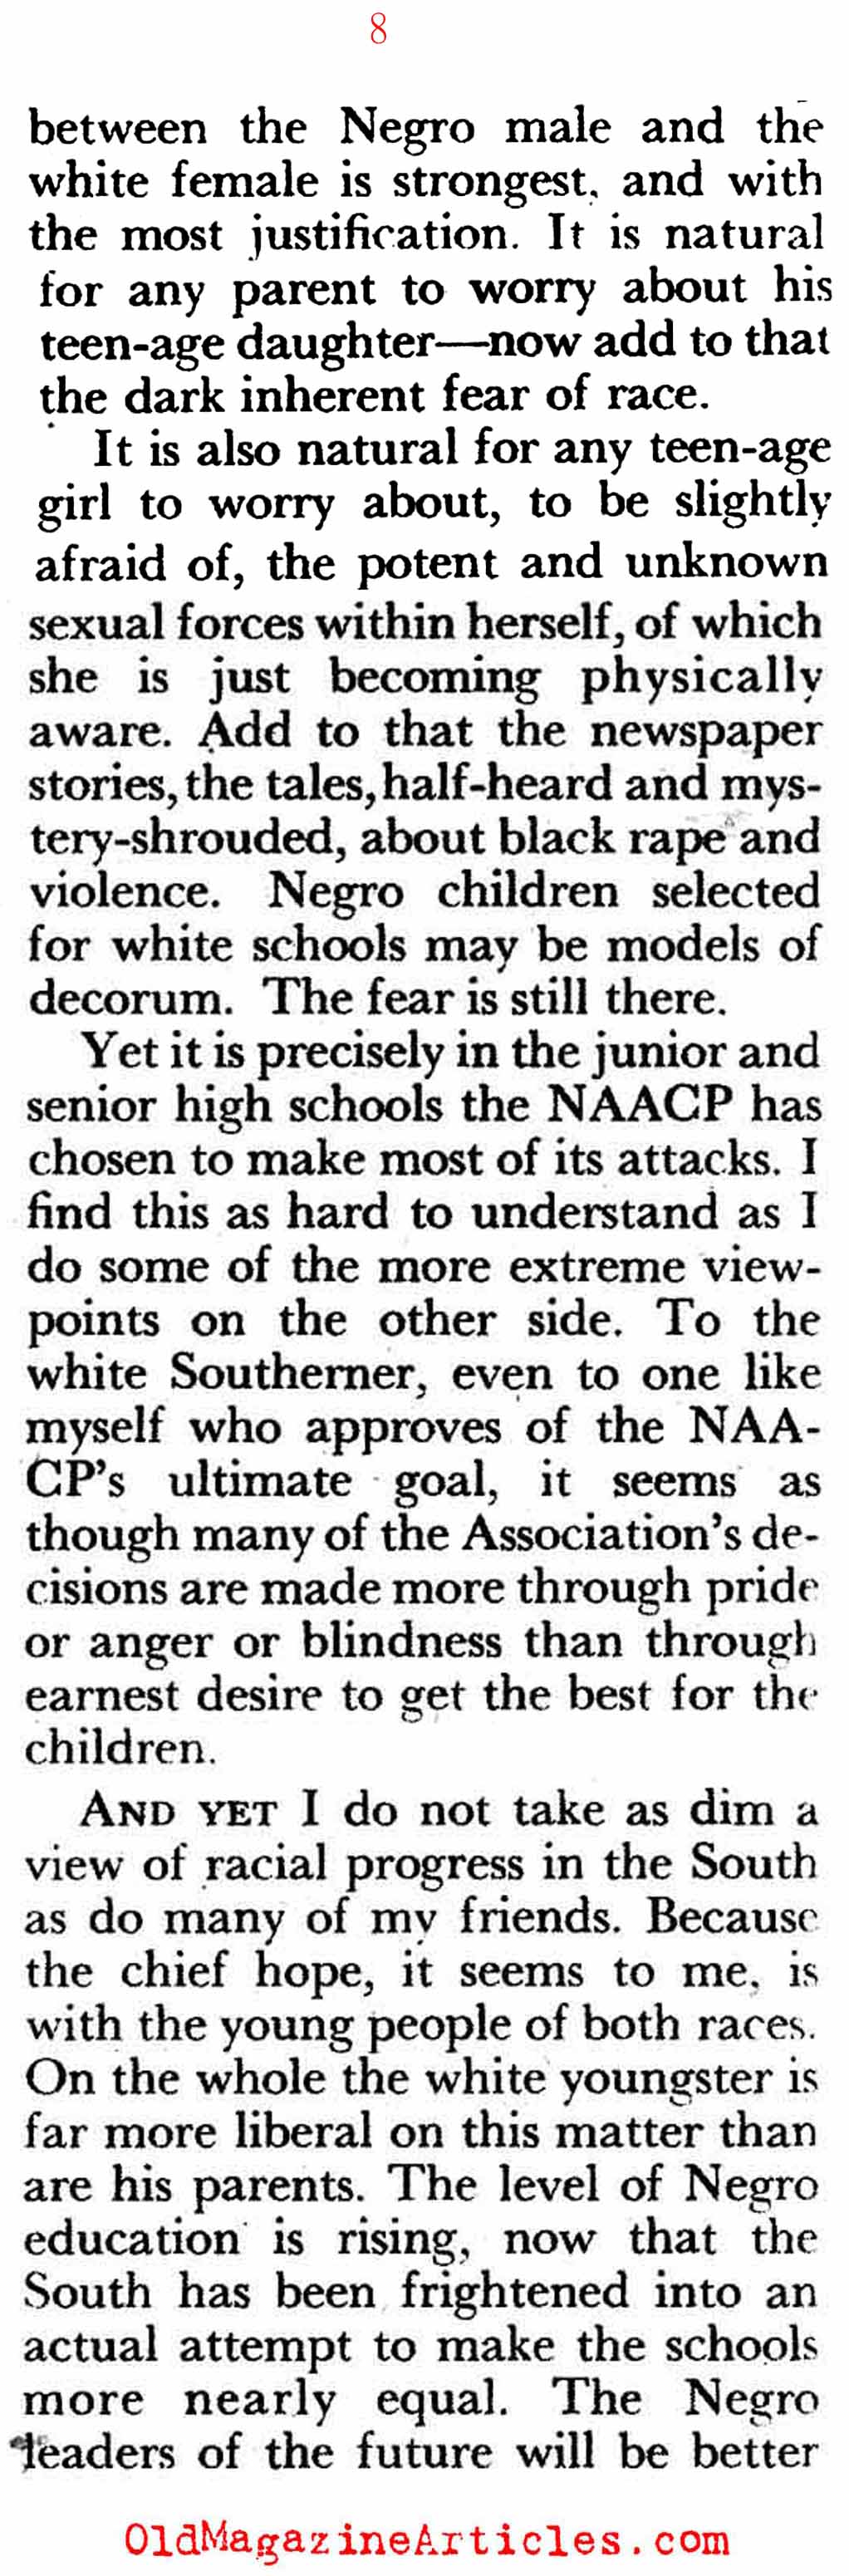 The Old Southern View of Integration (Pageant Magazine, 1959)